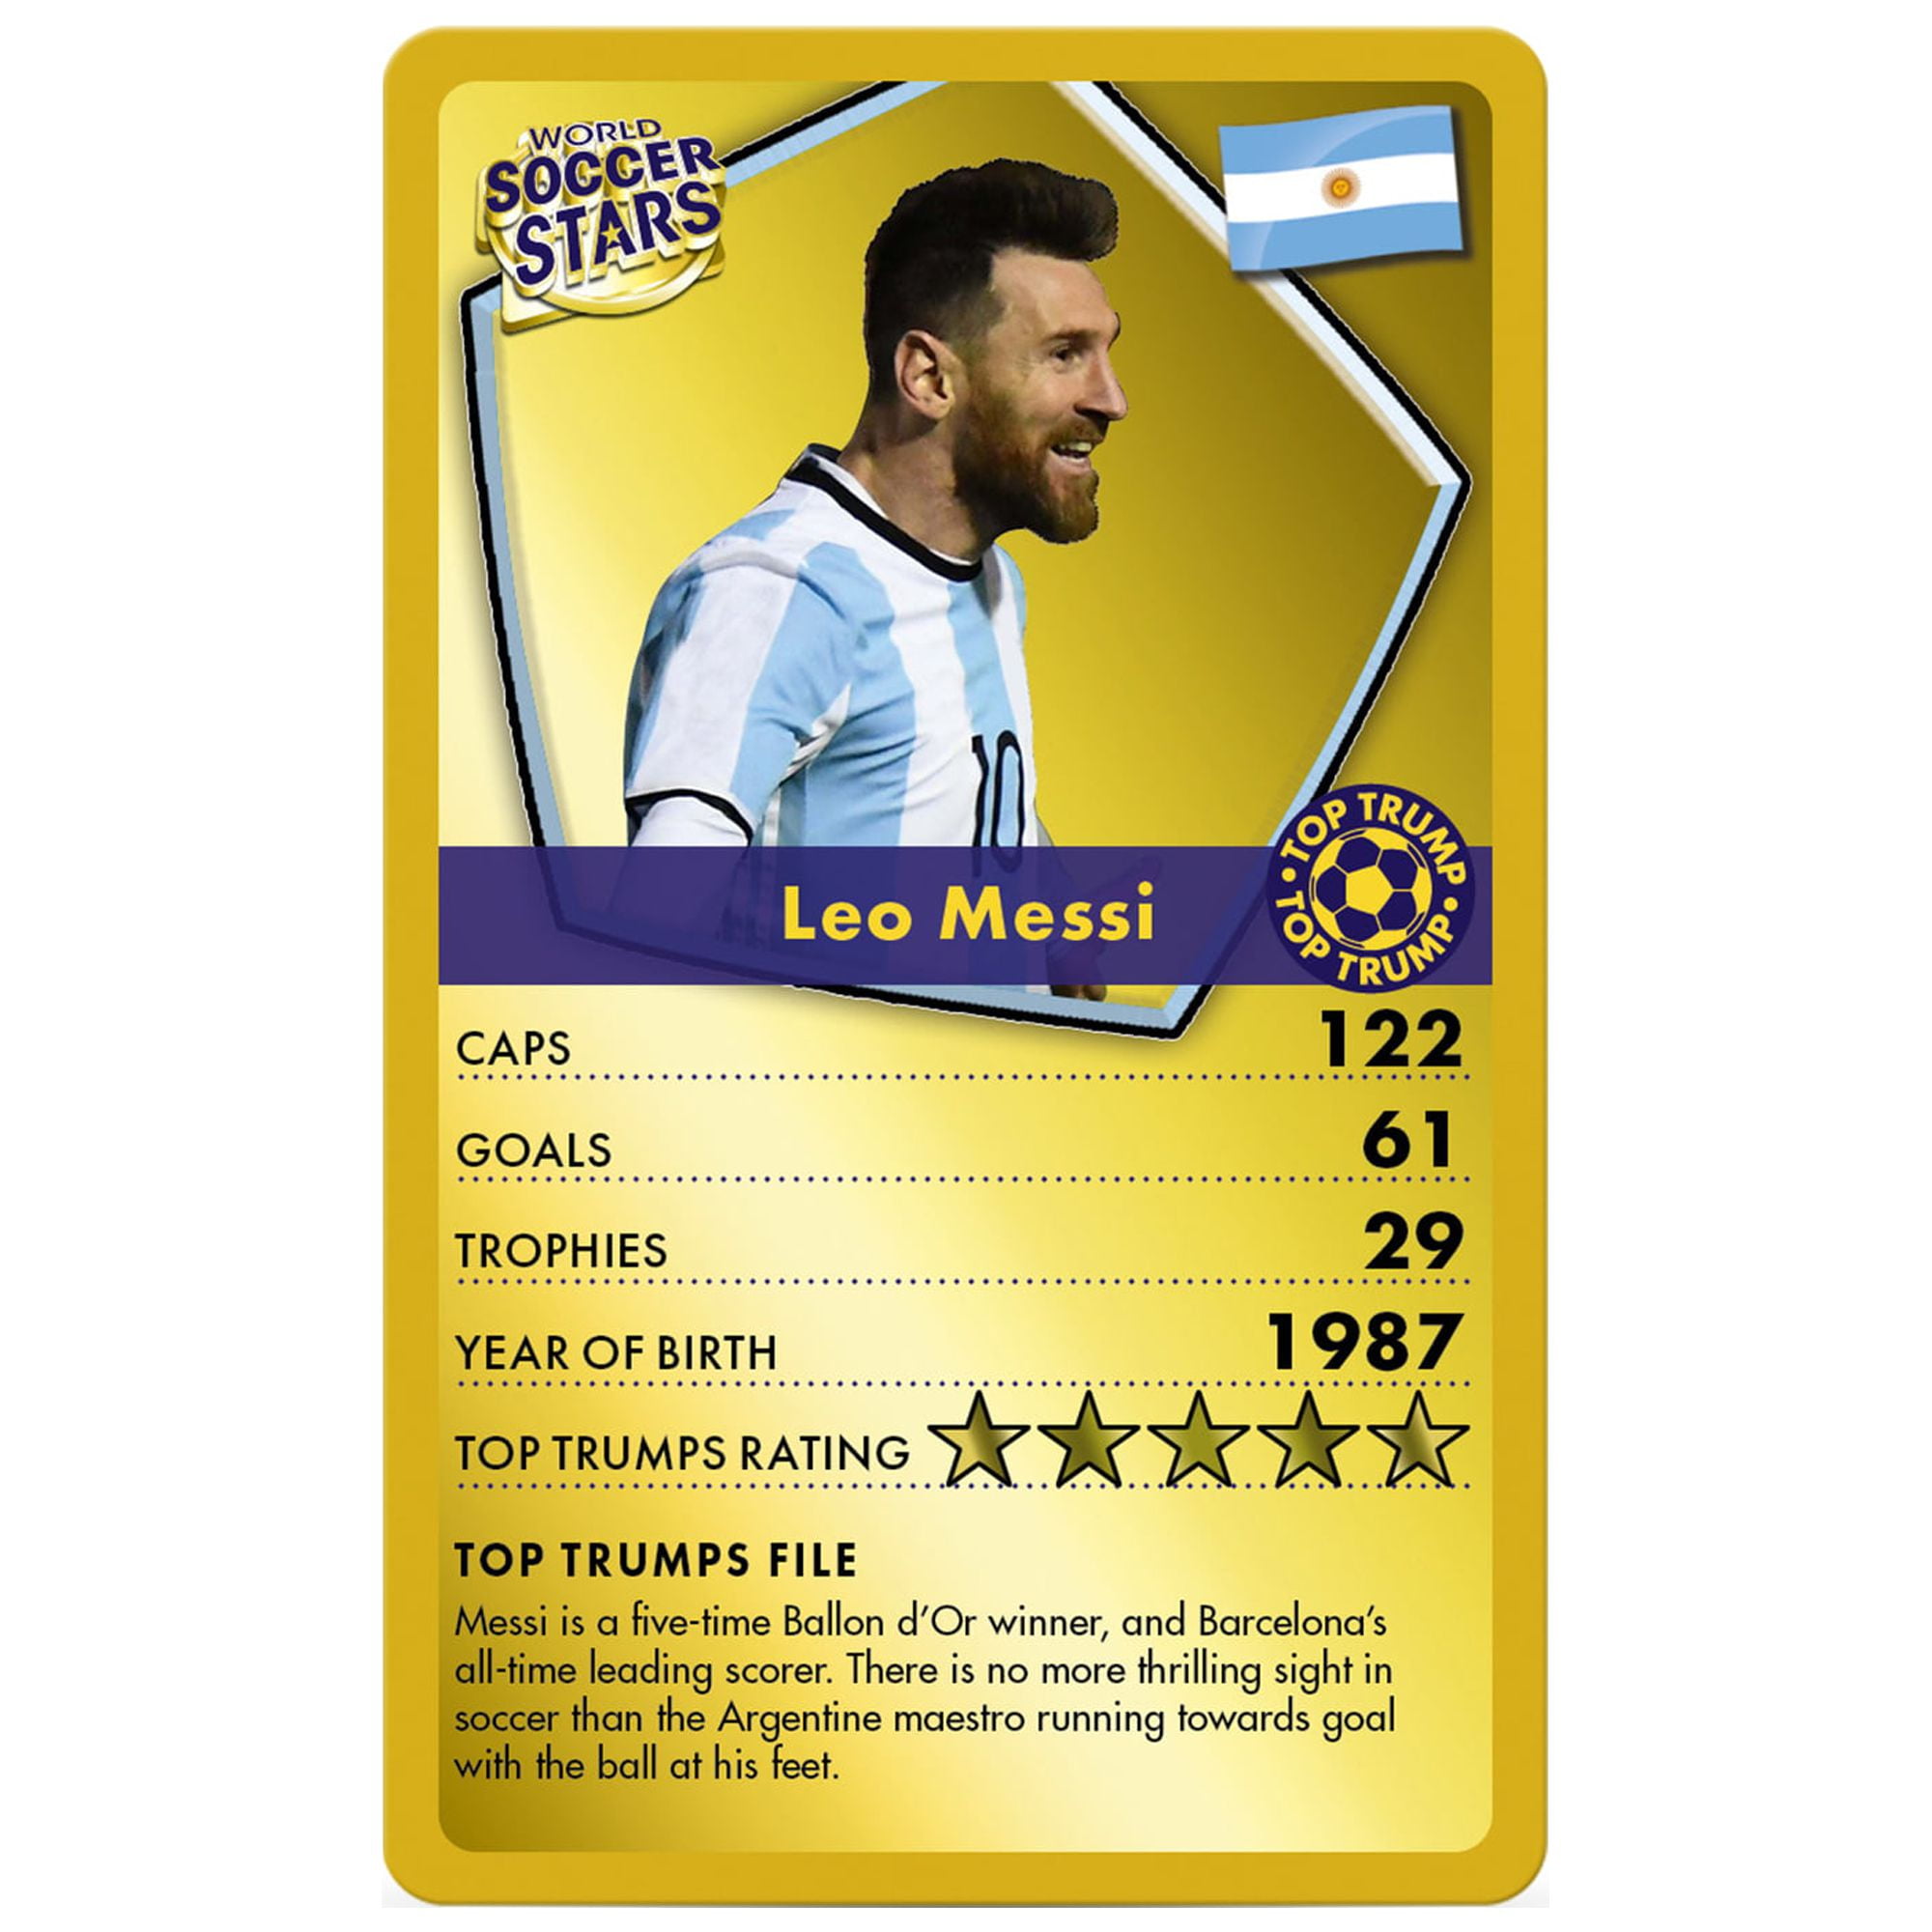  Top Trumps World Soccer Stars Specials Card Game